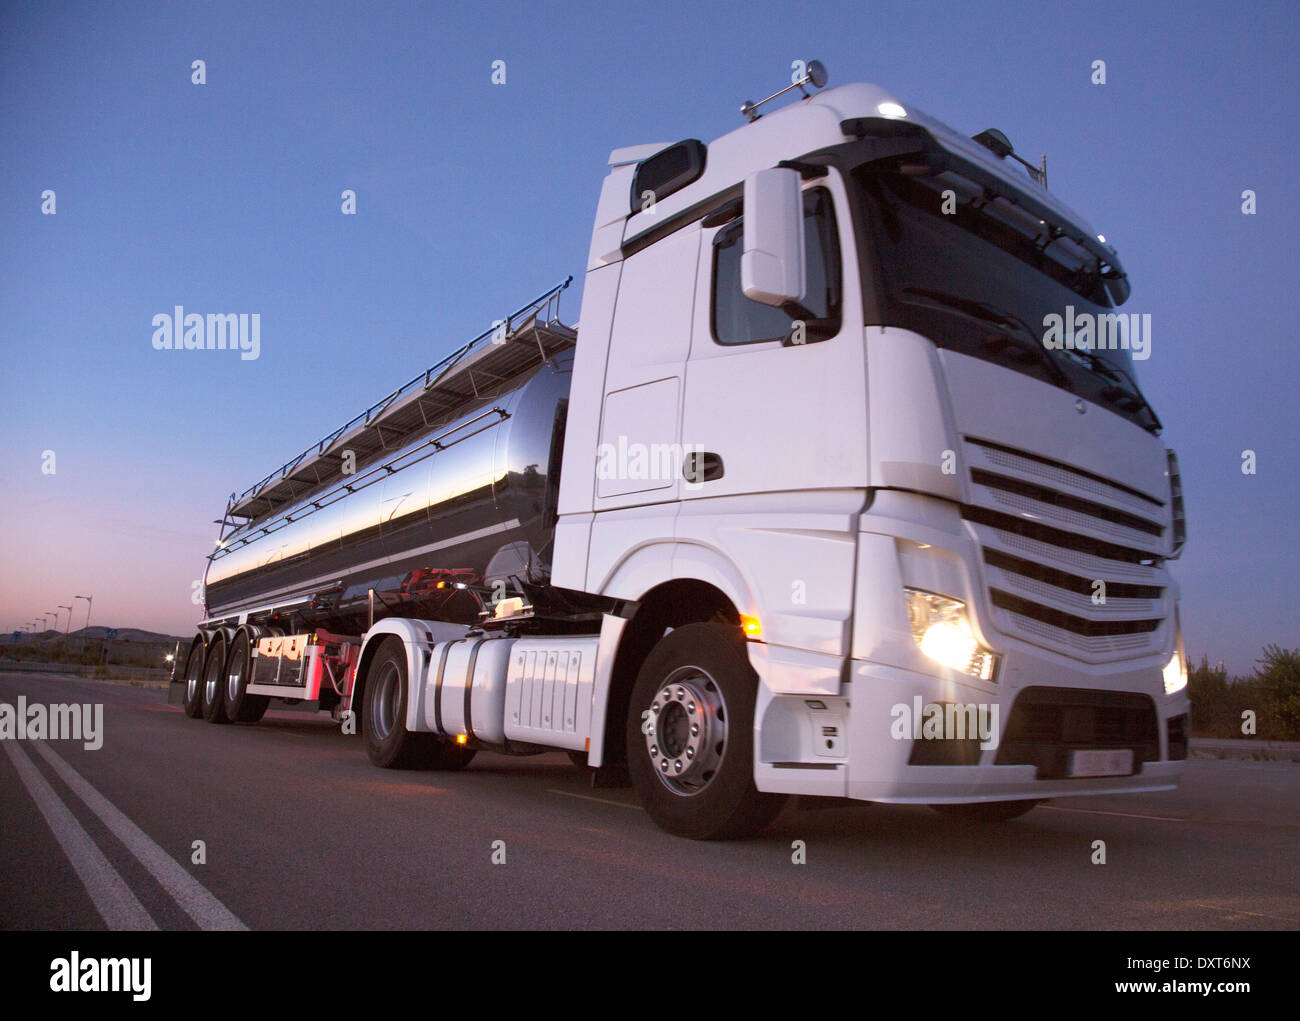 Stainless steel milk tanker on the road at night Stock Photo